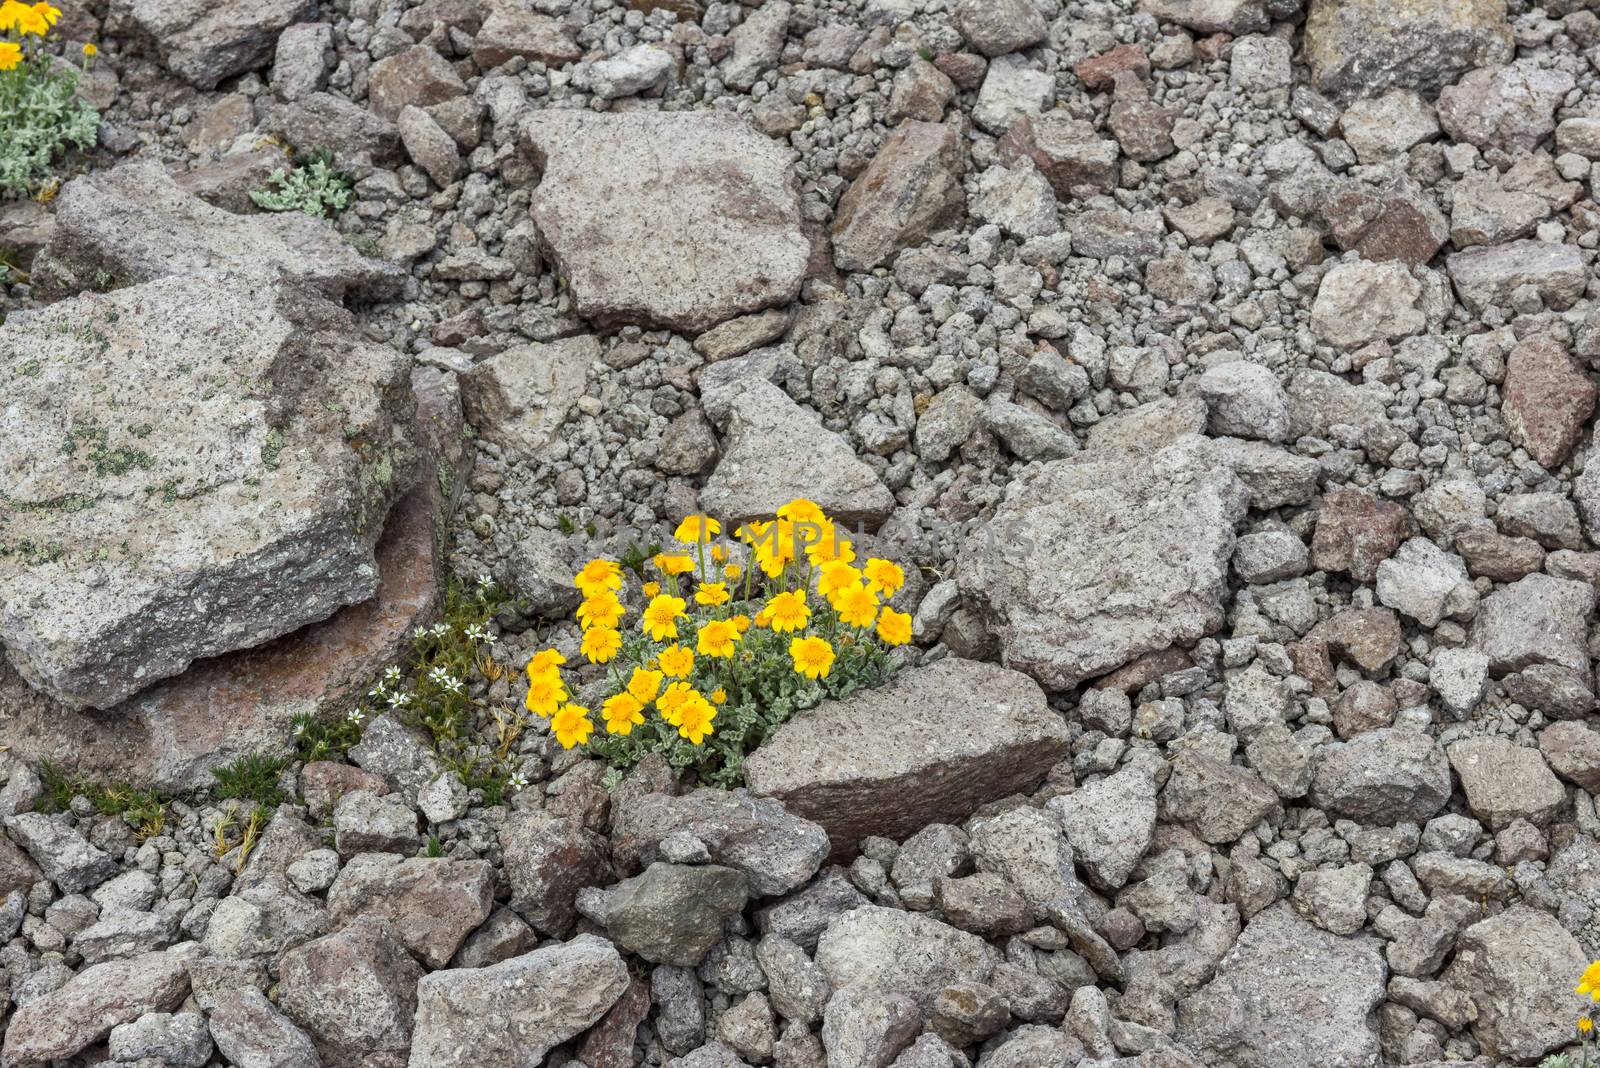 Yellow flowers, ground-clinging vegetaion, in the alipine zone on Mammoth Mountain, California by Njean